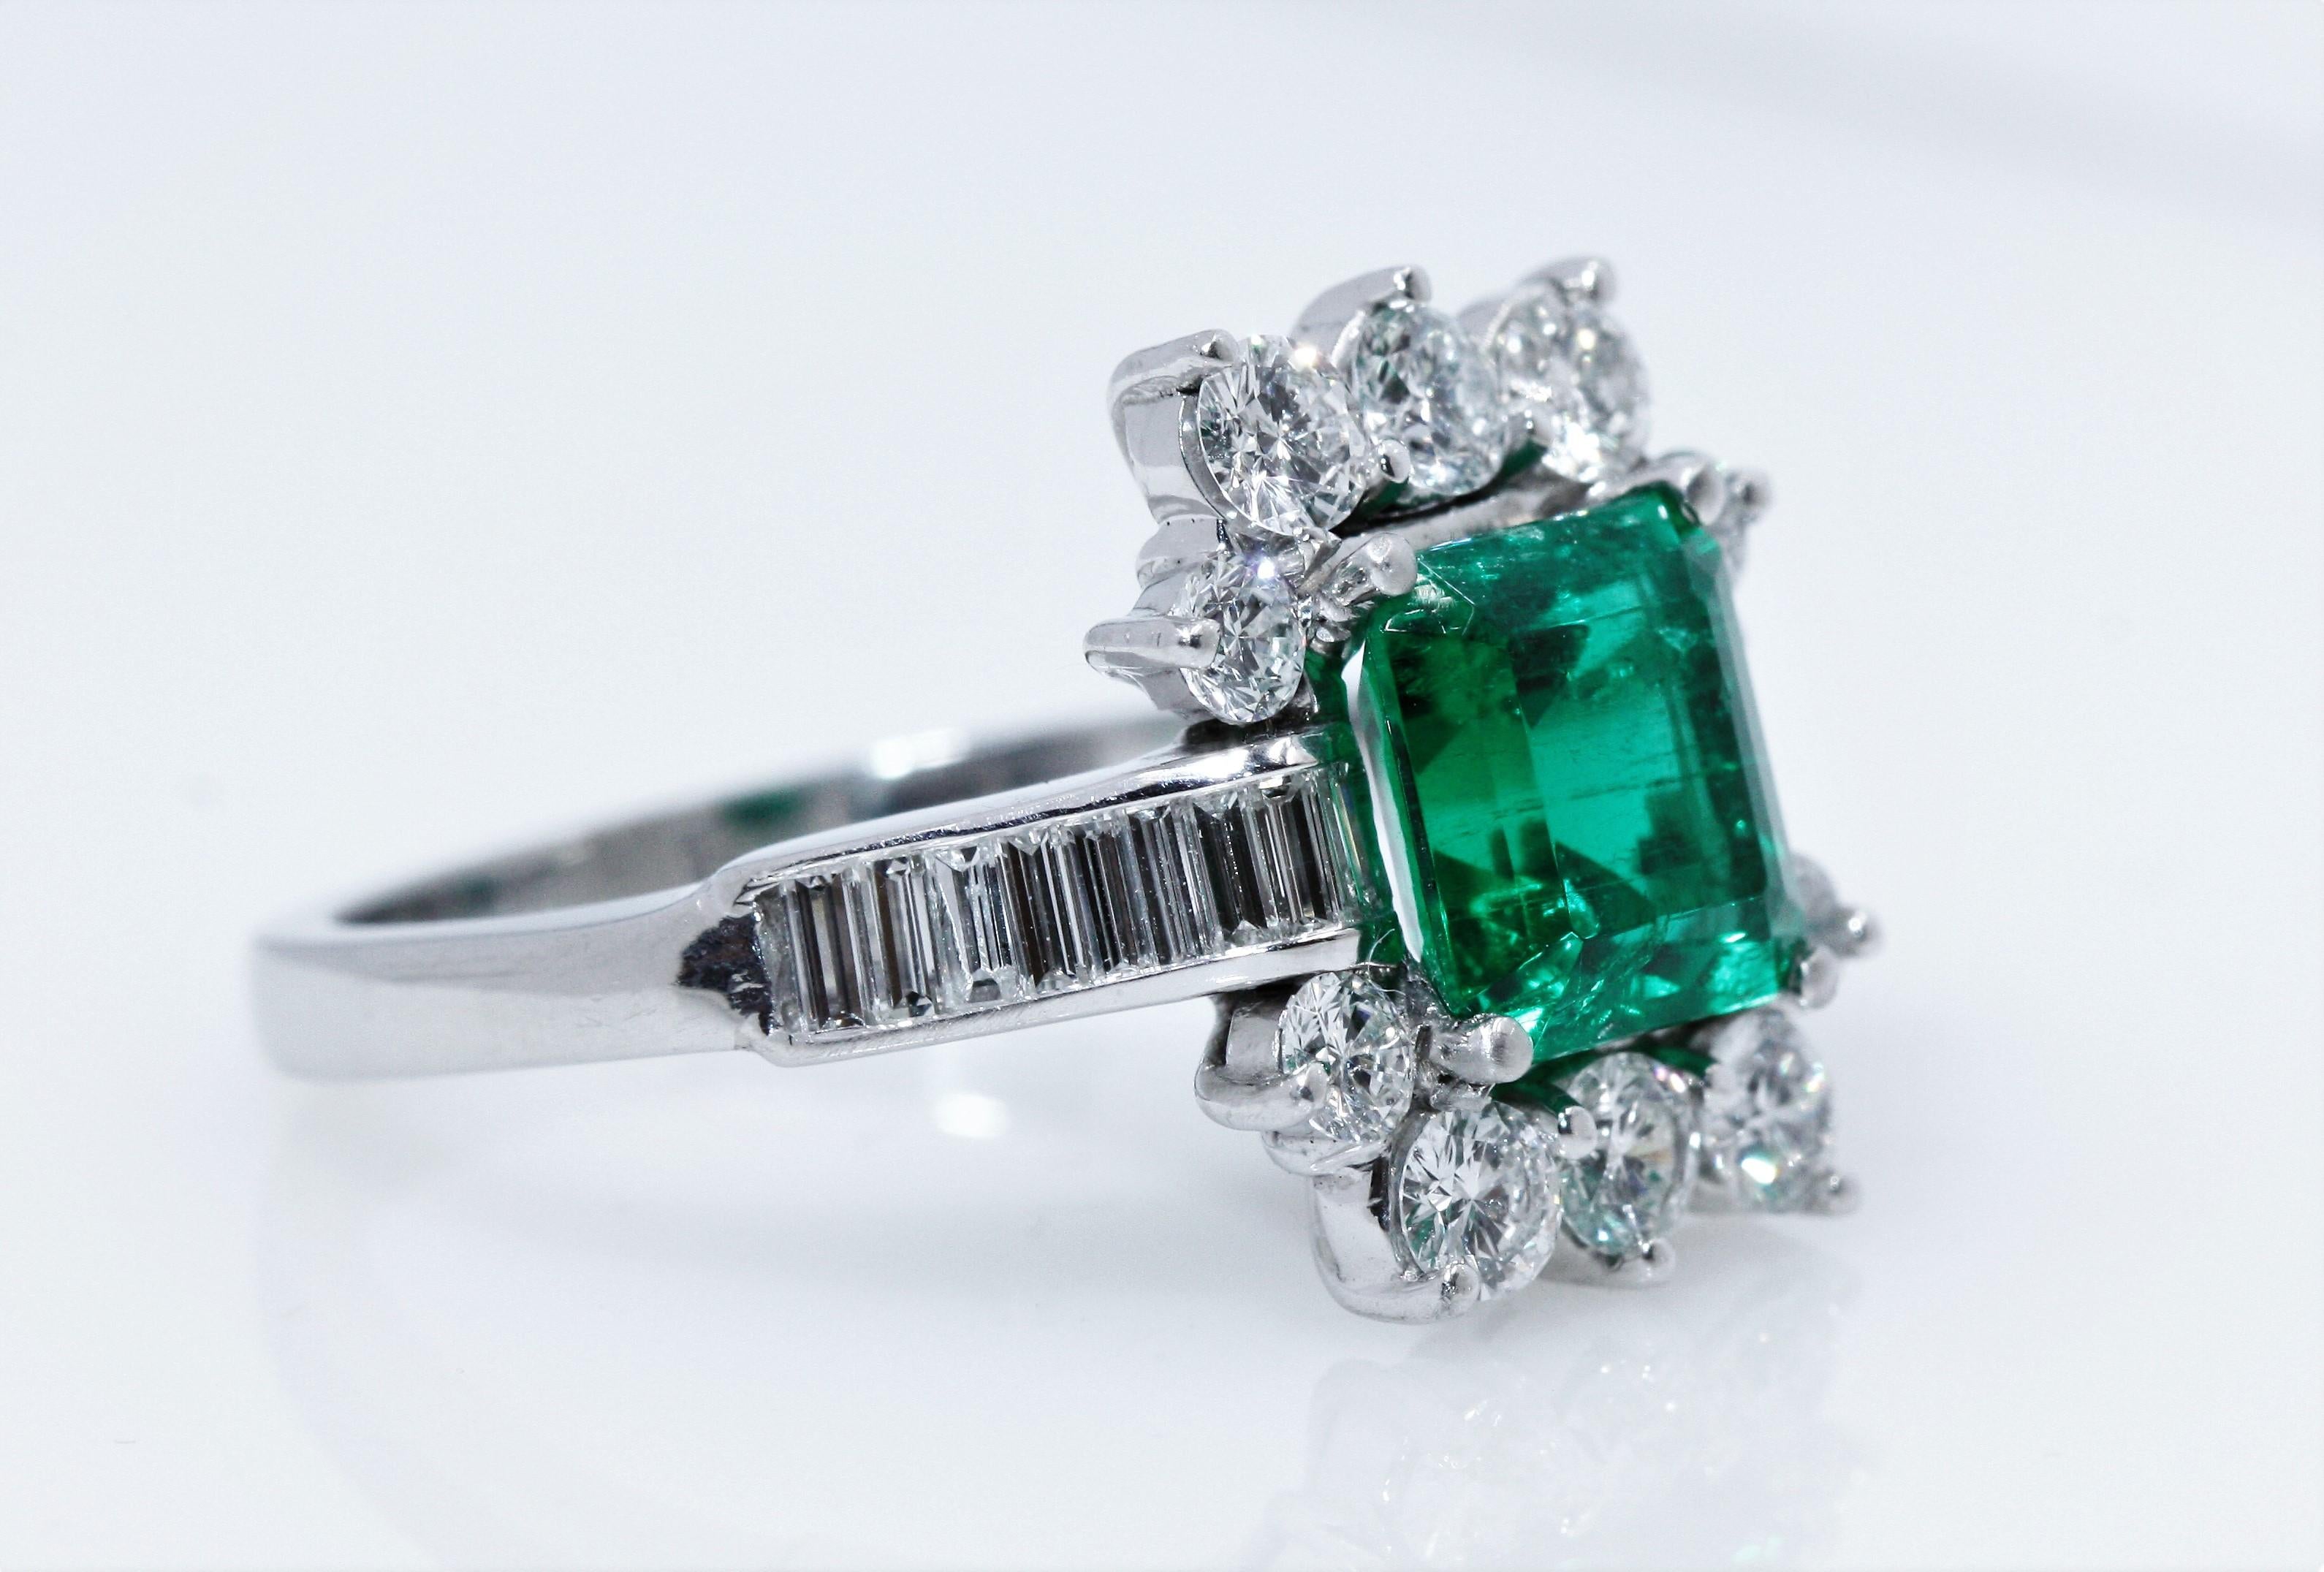 Comments: Set in a white metal ring with several round and baguette diamonds
Mineral Type: Natural Beryl
Variety: Emerald
Measurements: Approx. 7.79 x 7.38 x 5.59 mm
Shape: Rectangular
Color: Green
Cutting Style: Emerald Cut
Origin: Colombia
Item